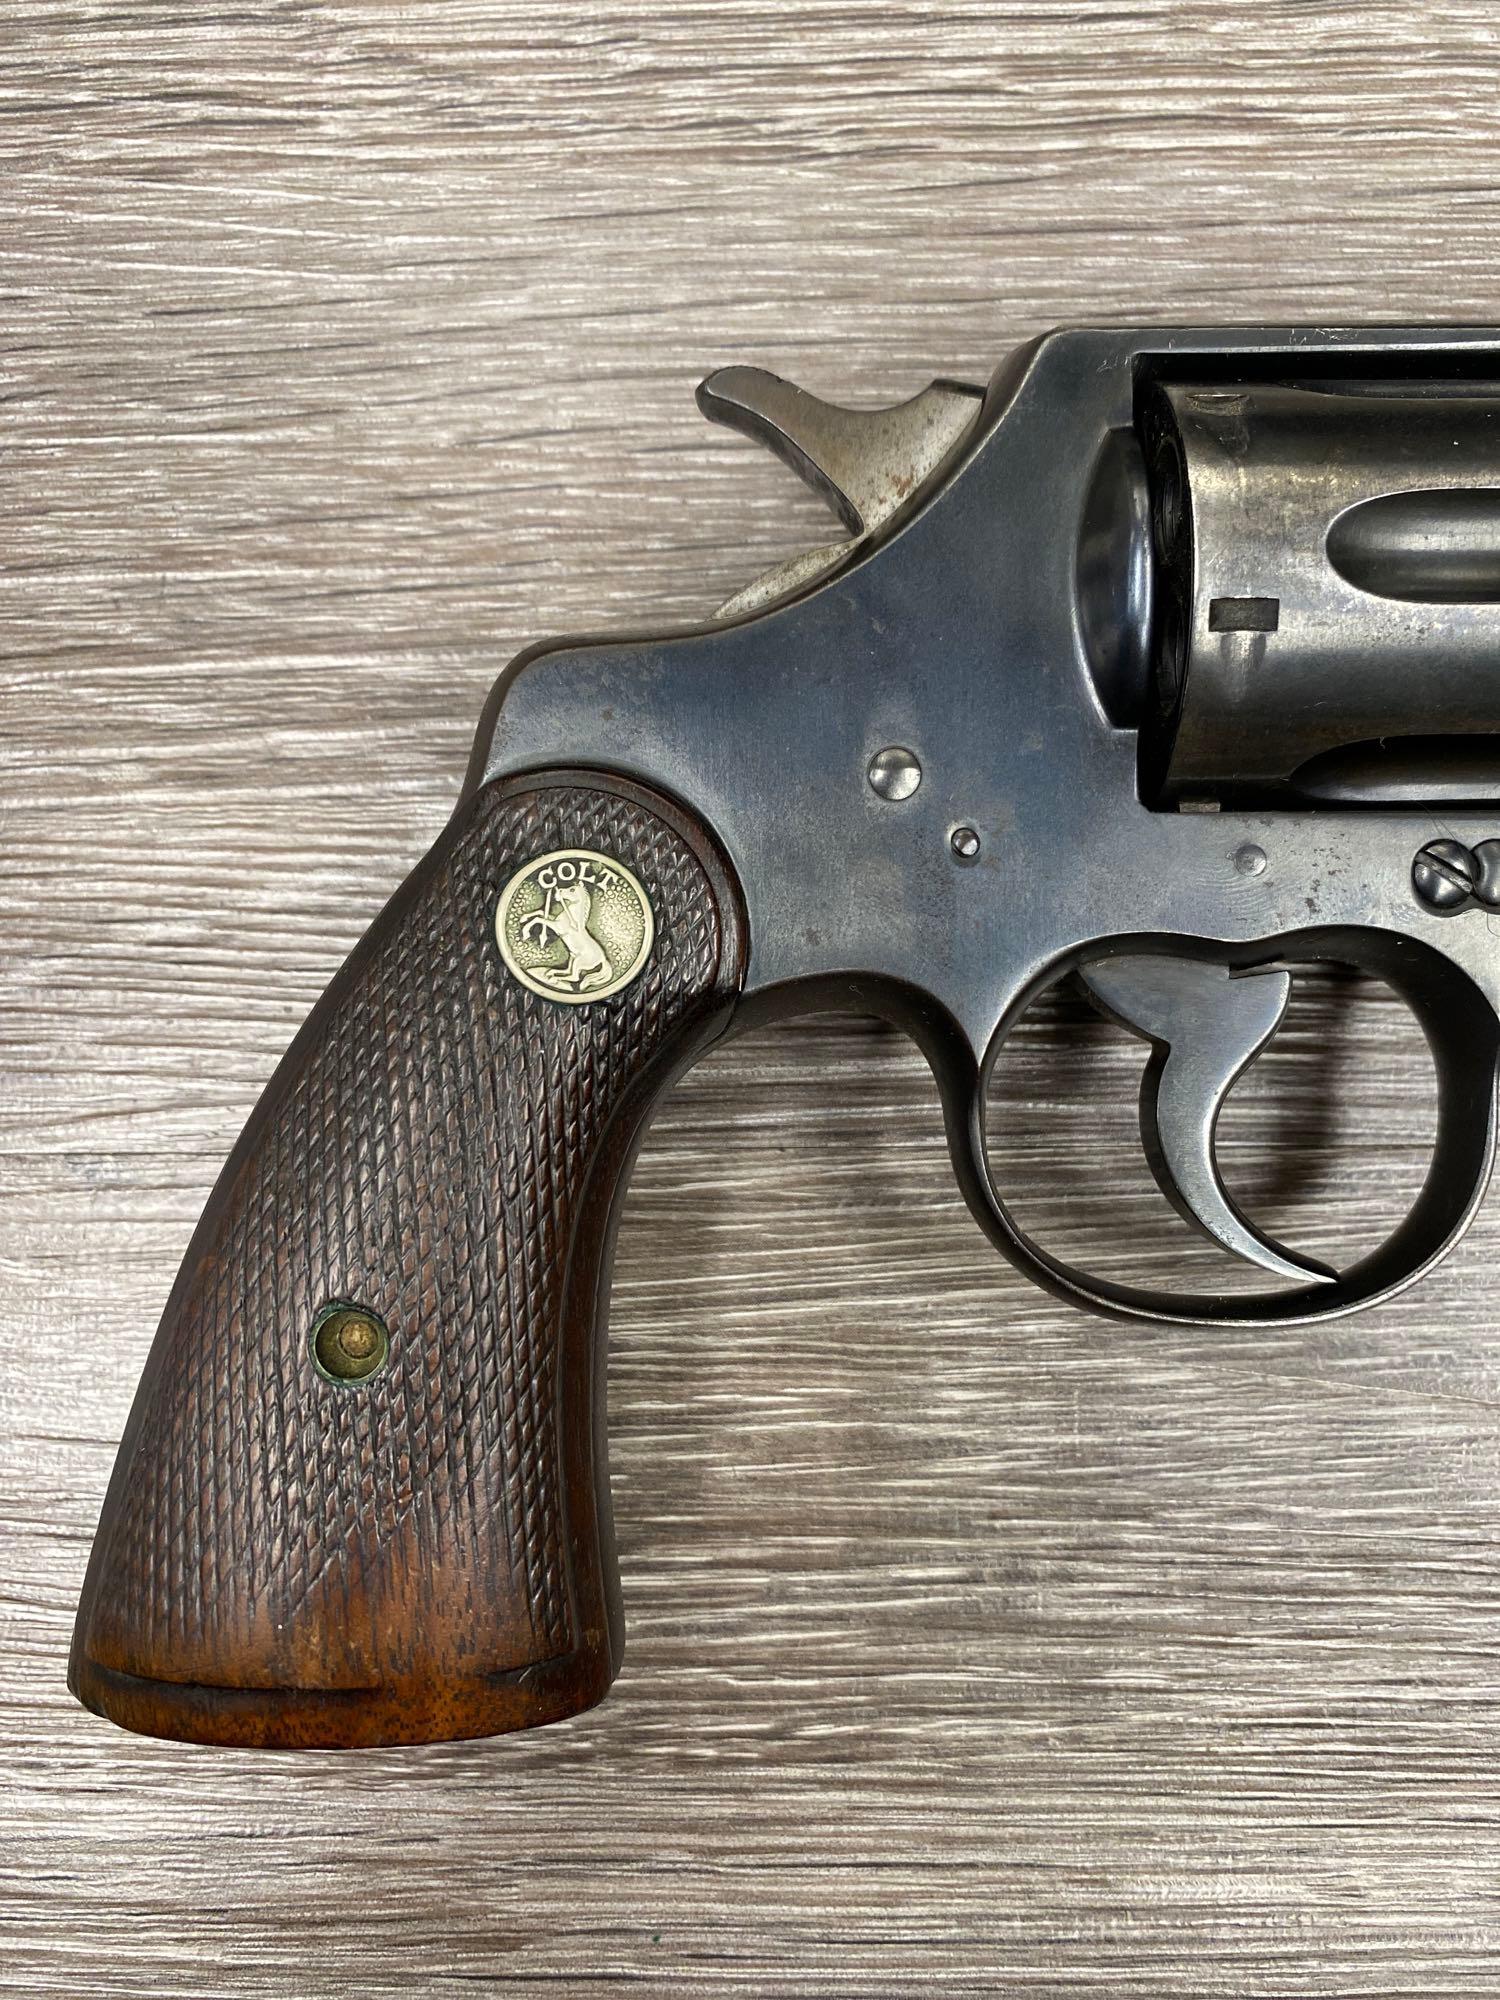 St. LOUIS PD MARKED COLT ARMY SPECIAL DOUBLE ACTION REVOLVER .38 SPECIAL CAL.